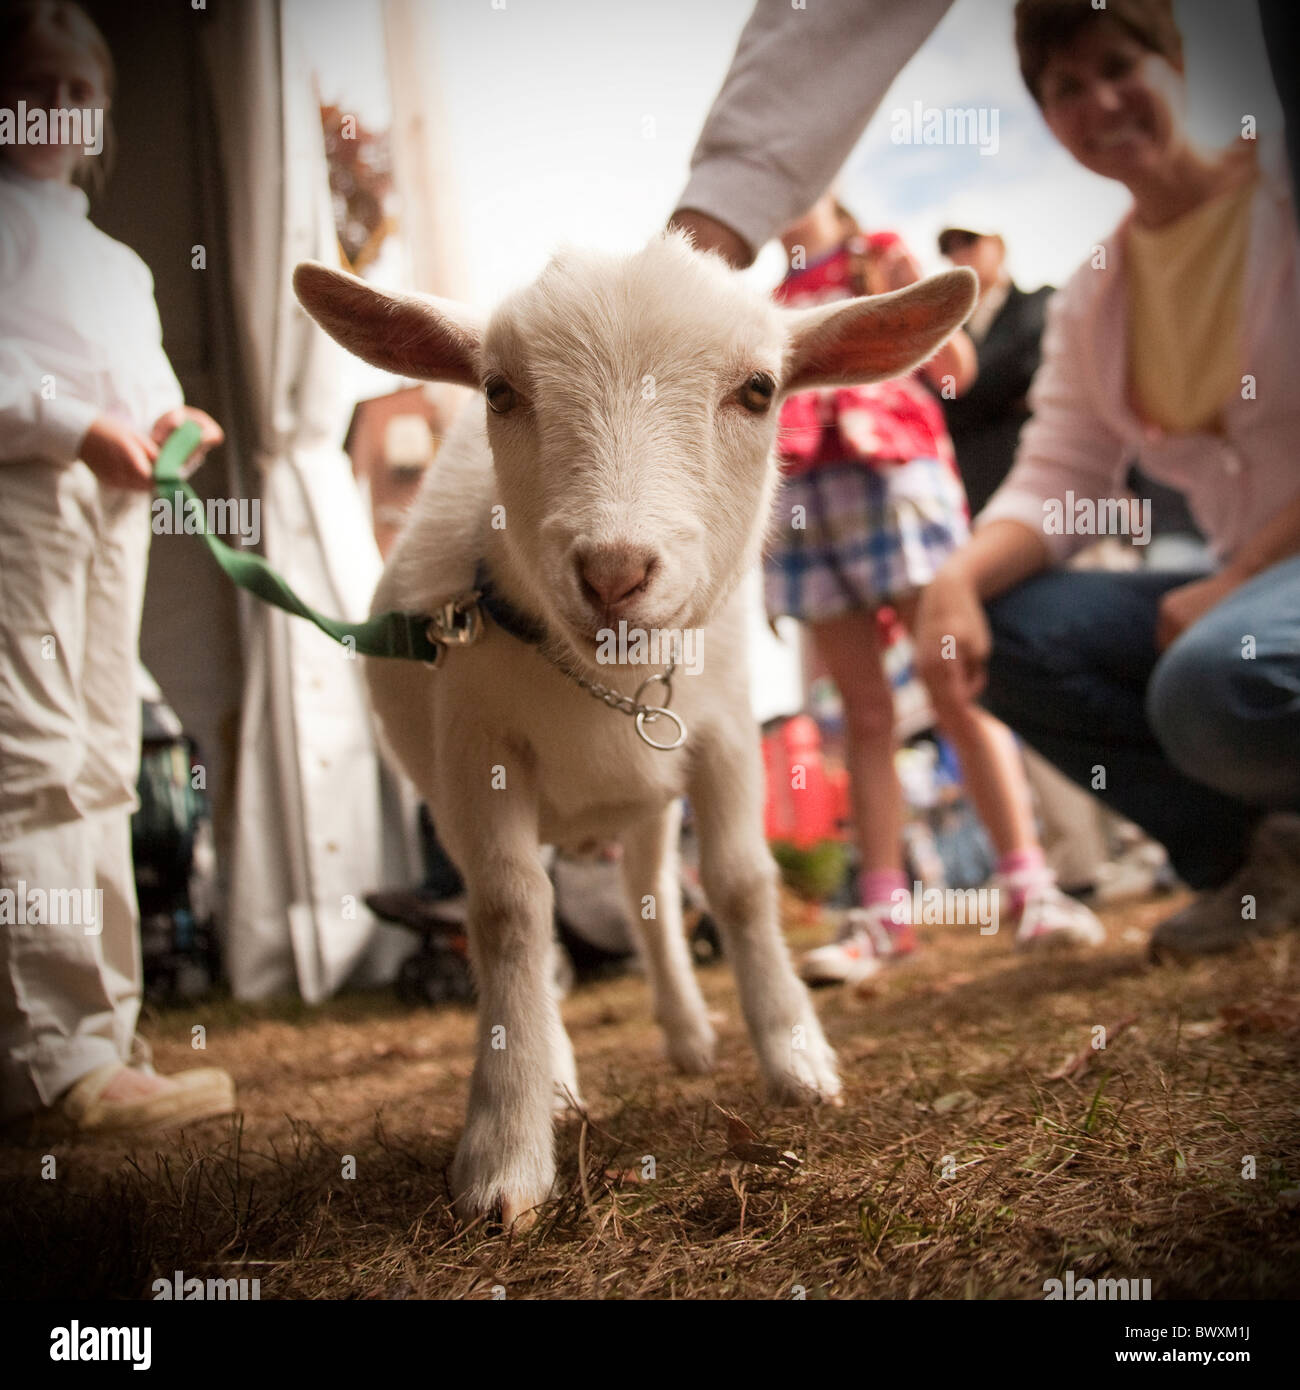 baby goat on leash at county agricultural fair Stock Photo